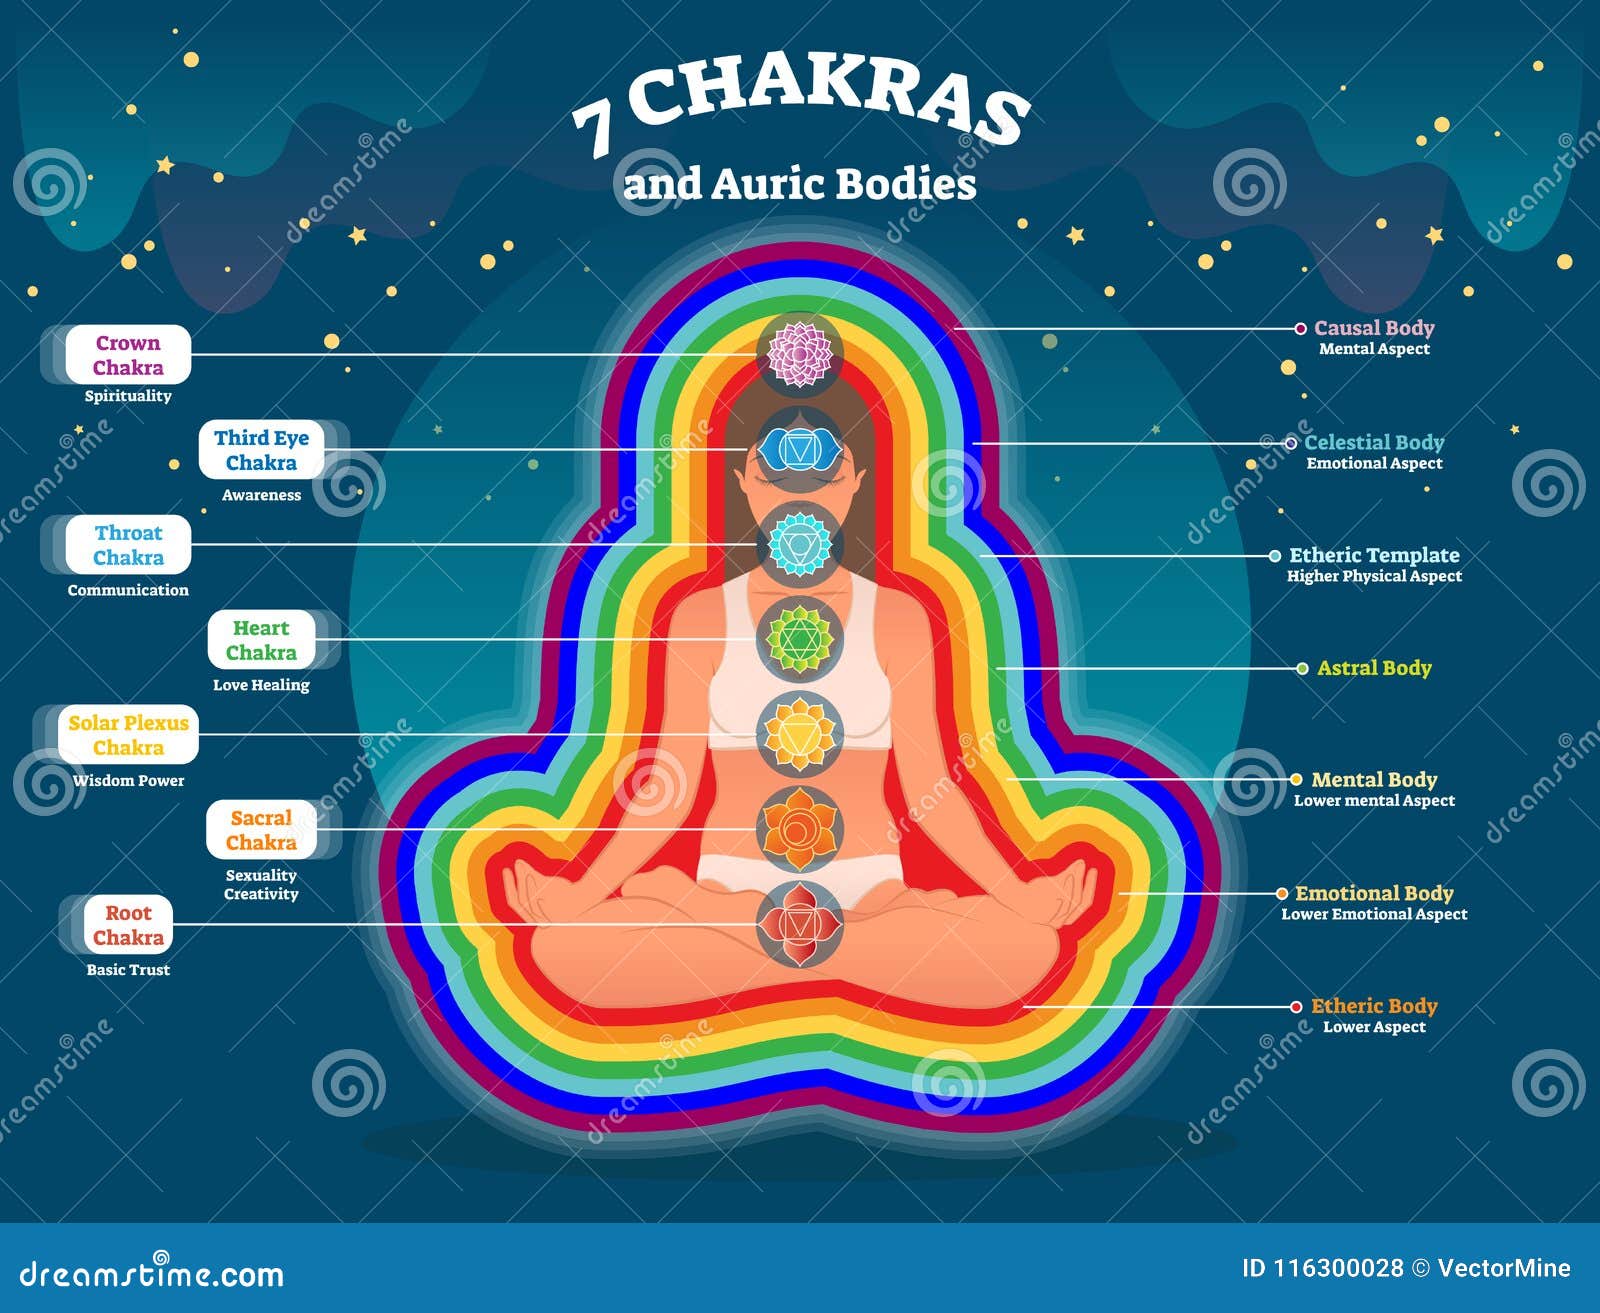 aura body layers, spiritual energy   diagram with seven chakras. energy balance system.yoga practice and healing